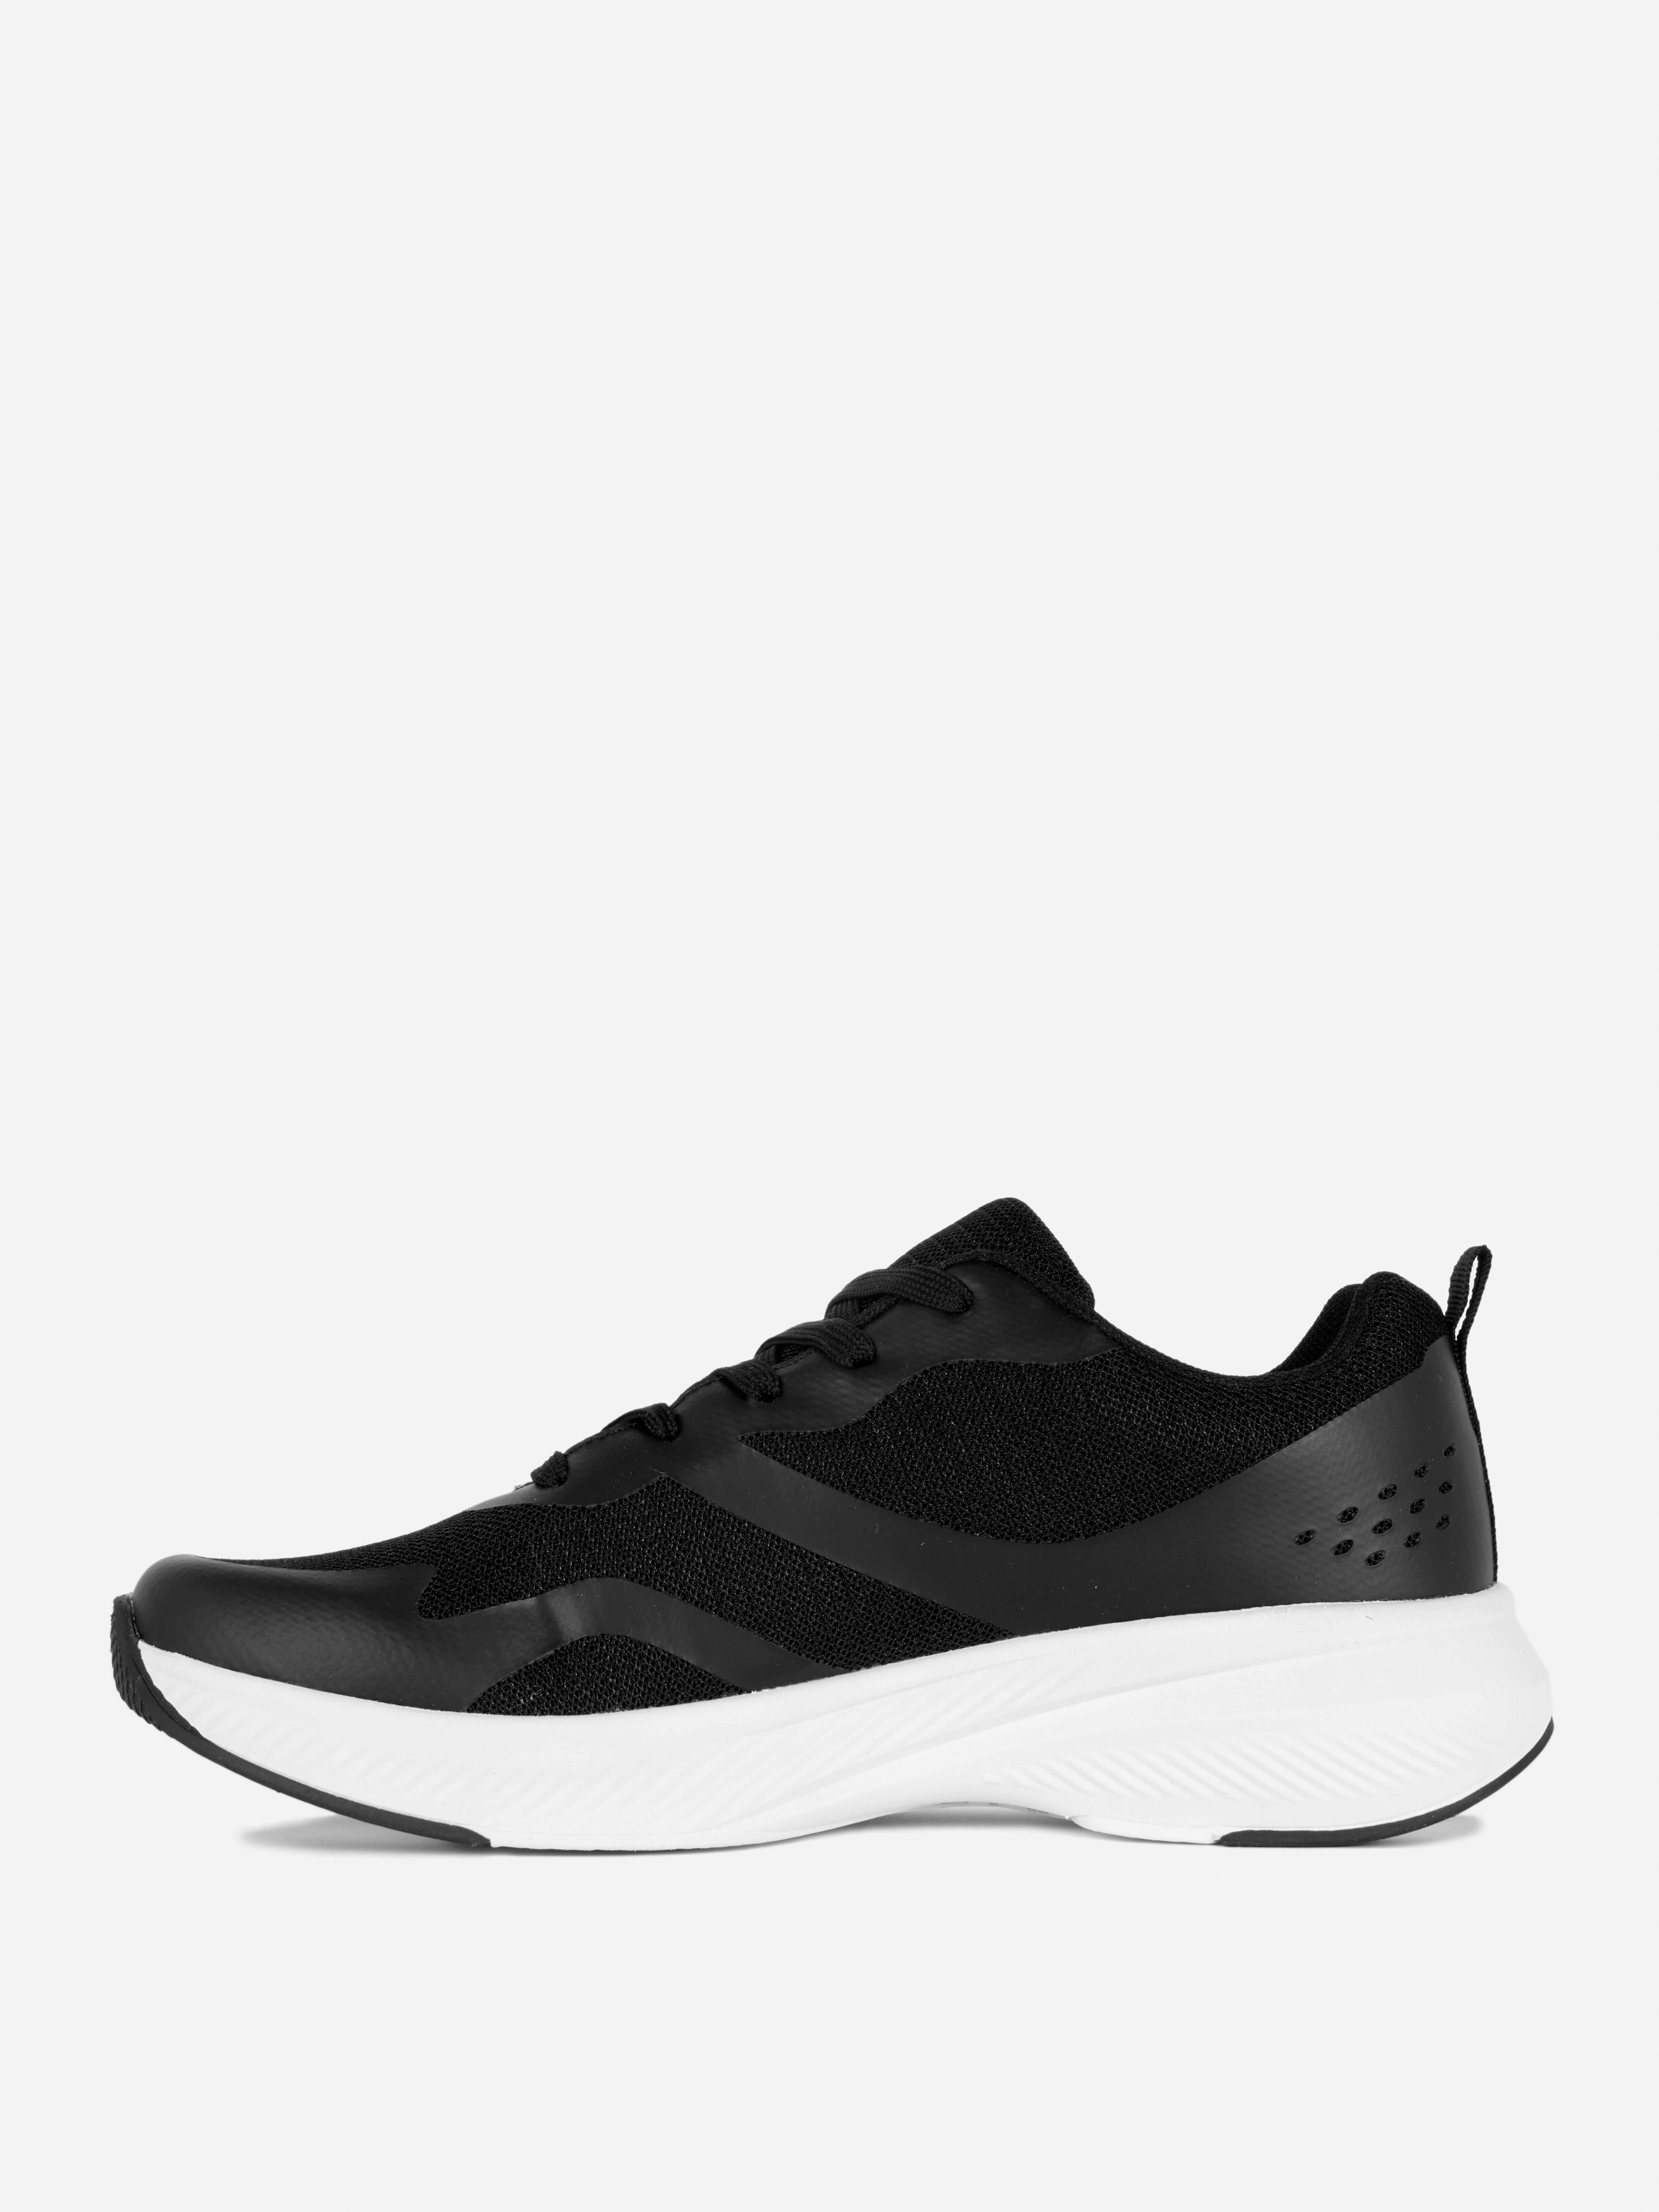 Womens Black/White Lace-up Sports Trainers | Primark